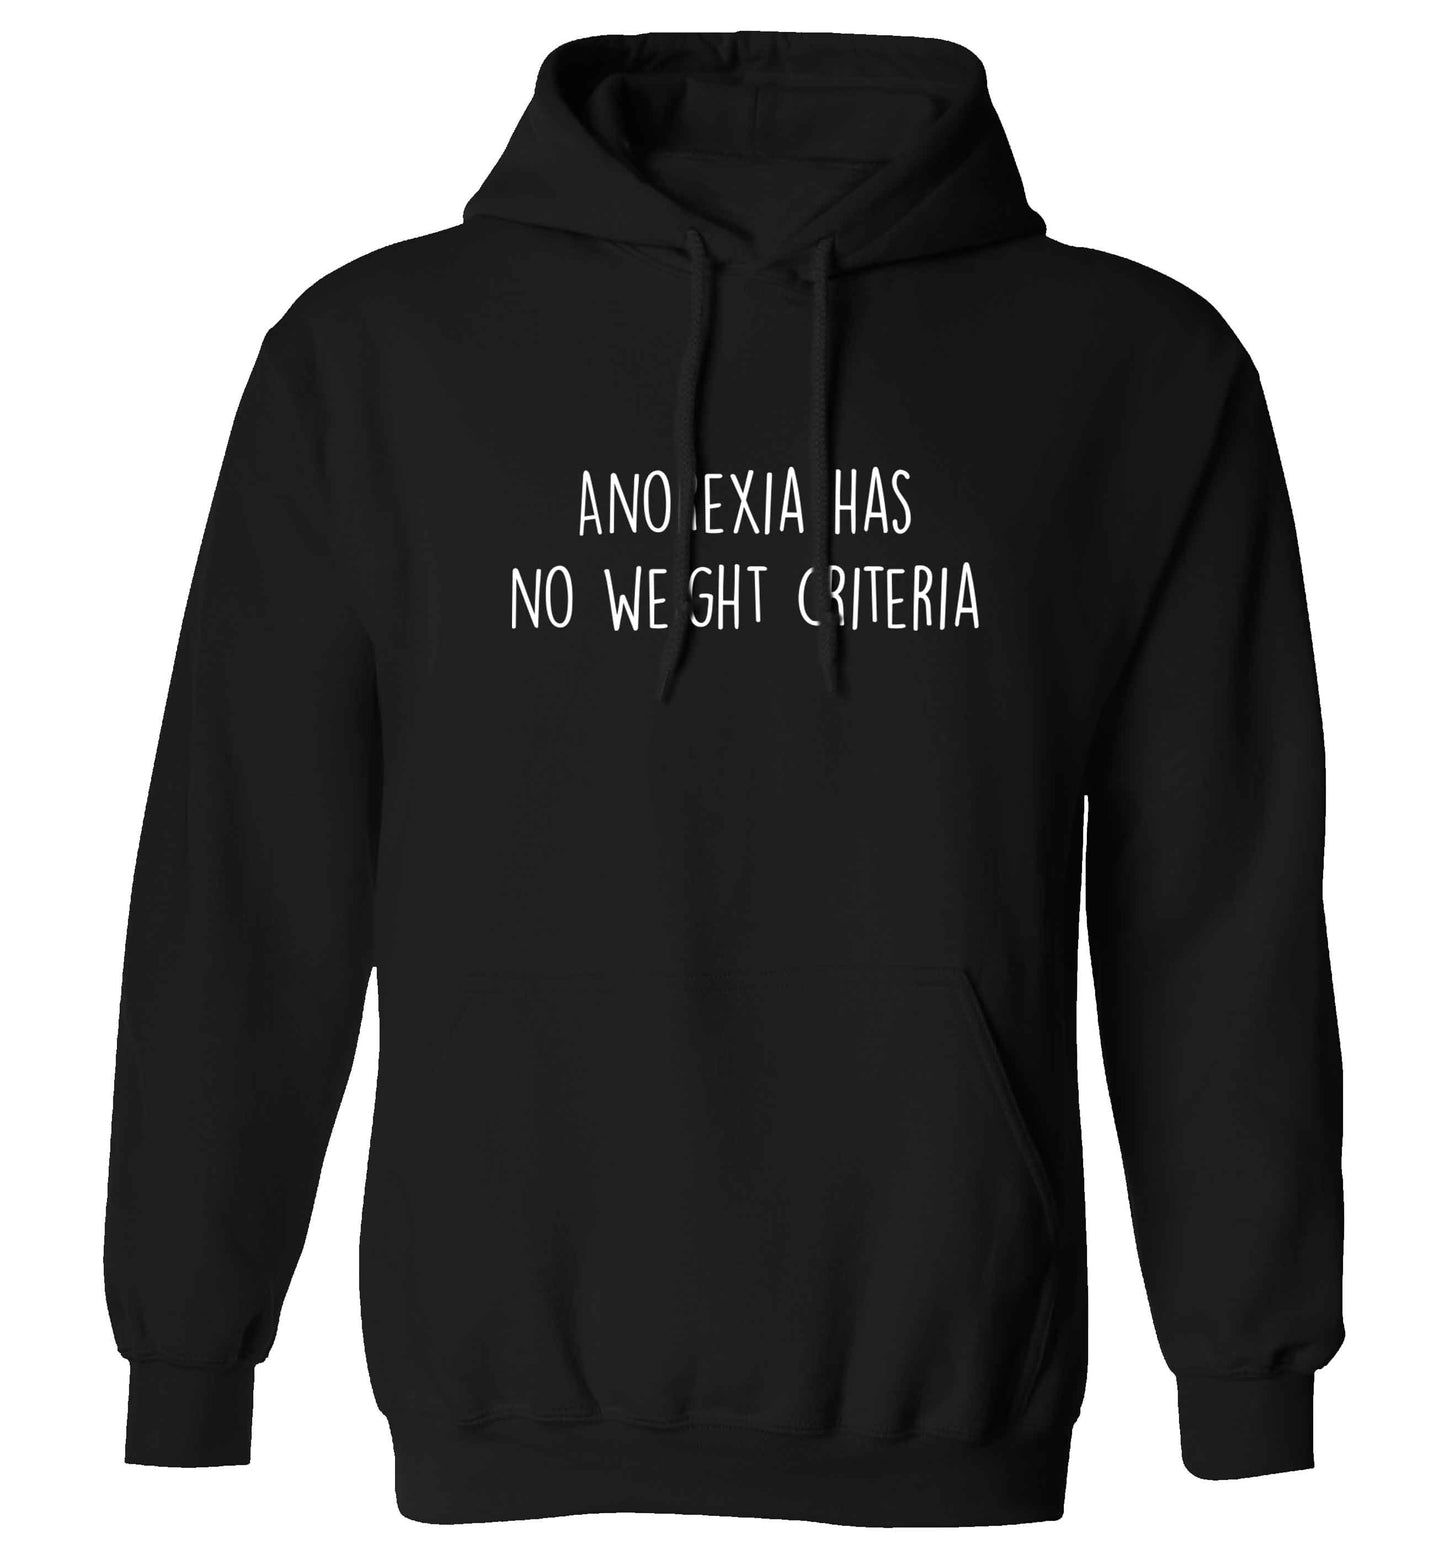 Anorexia has no weight criteria adults unisex black hoodie 2XL